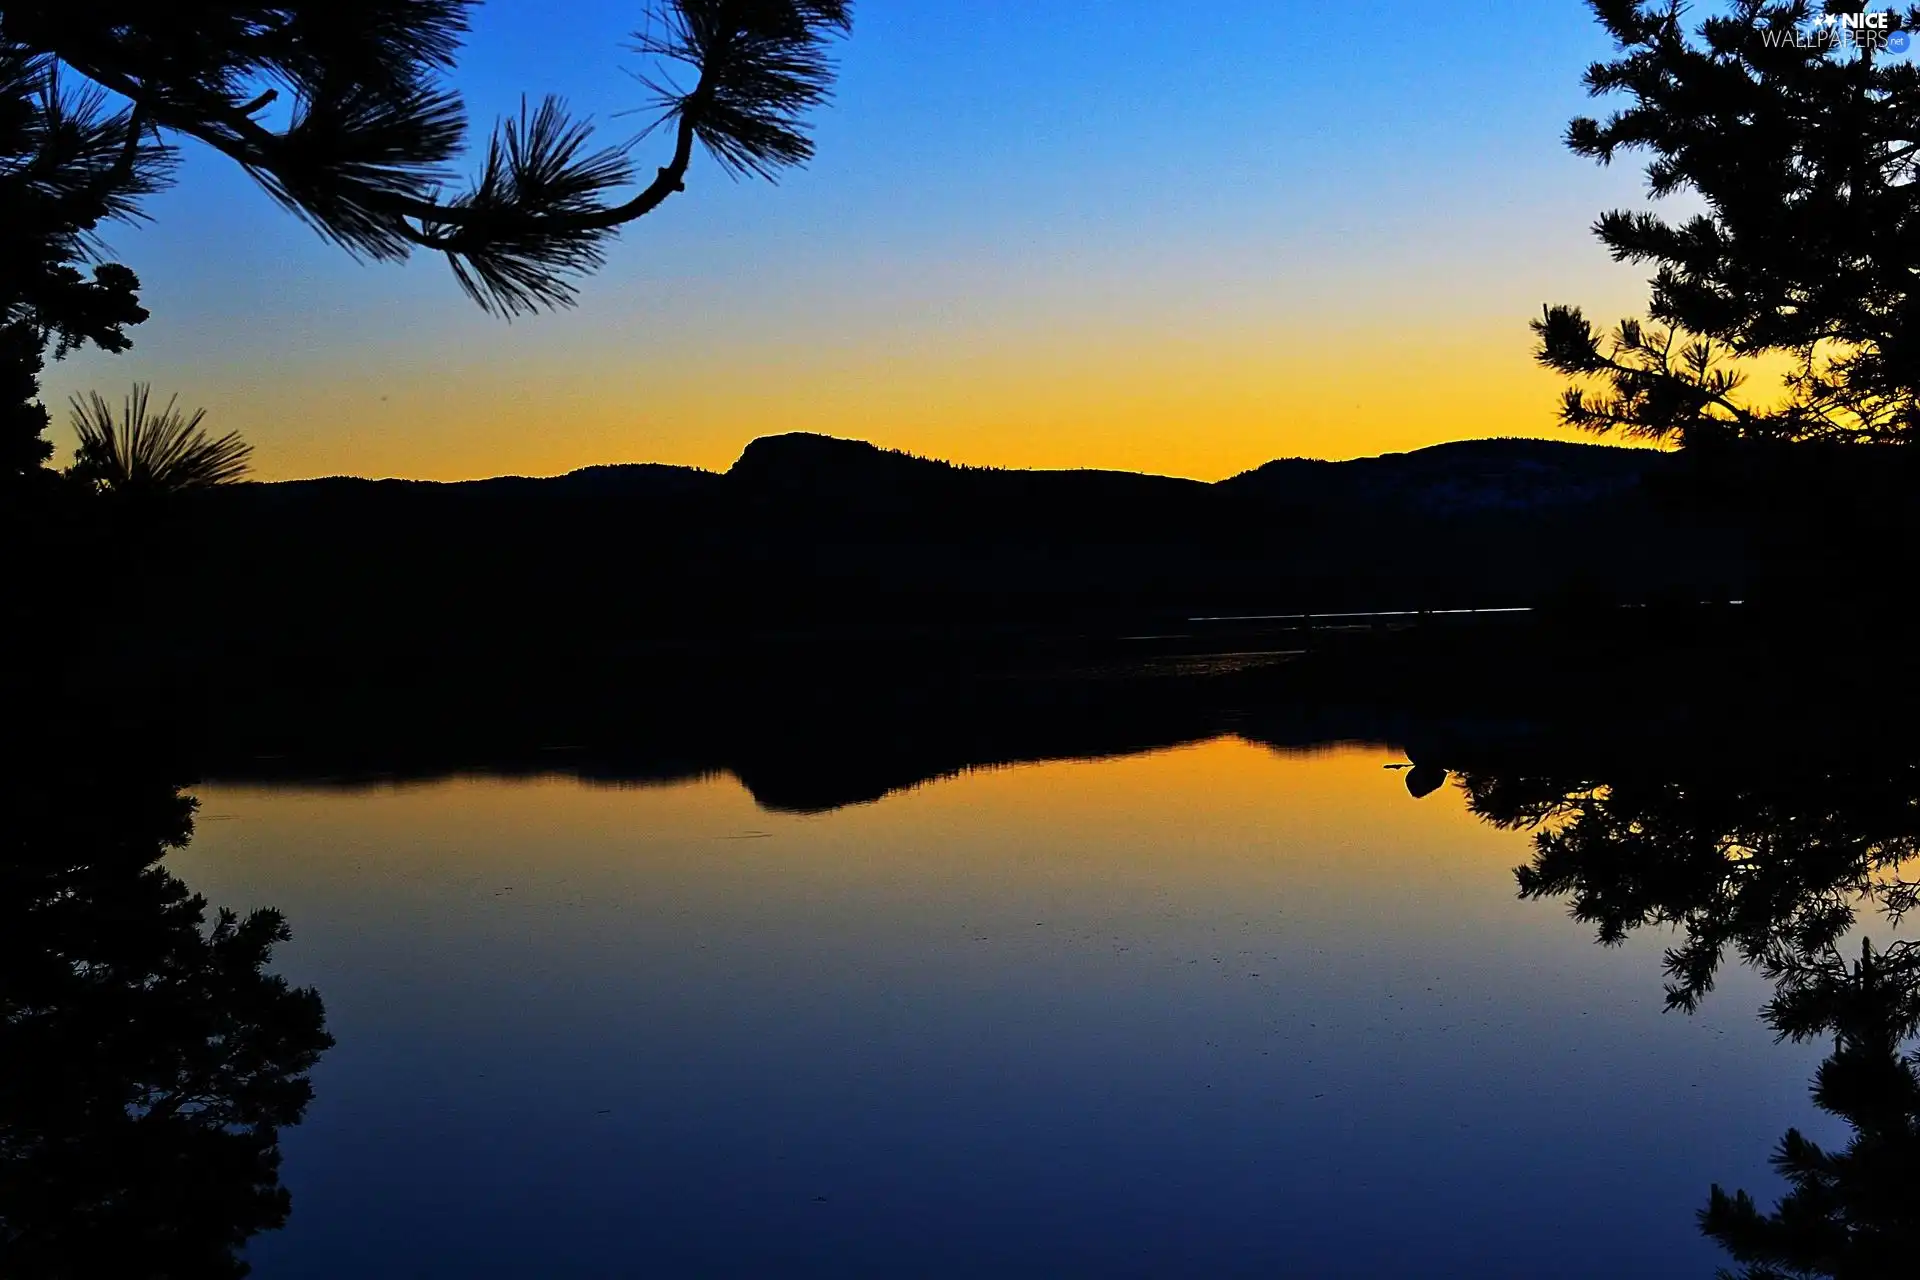 branch pics, lake, Loon, California, Great Sunsets, Mountains